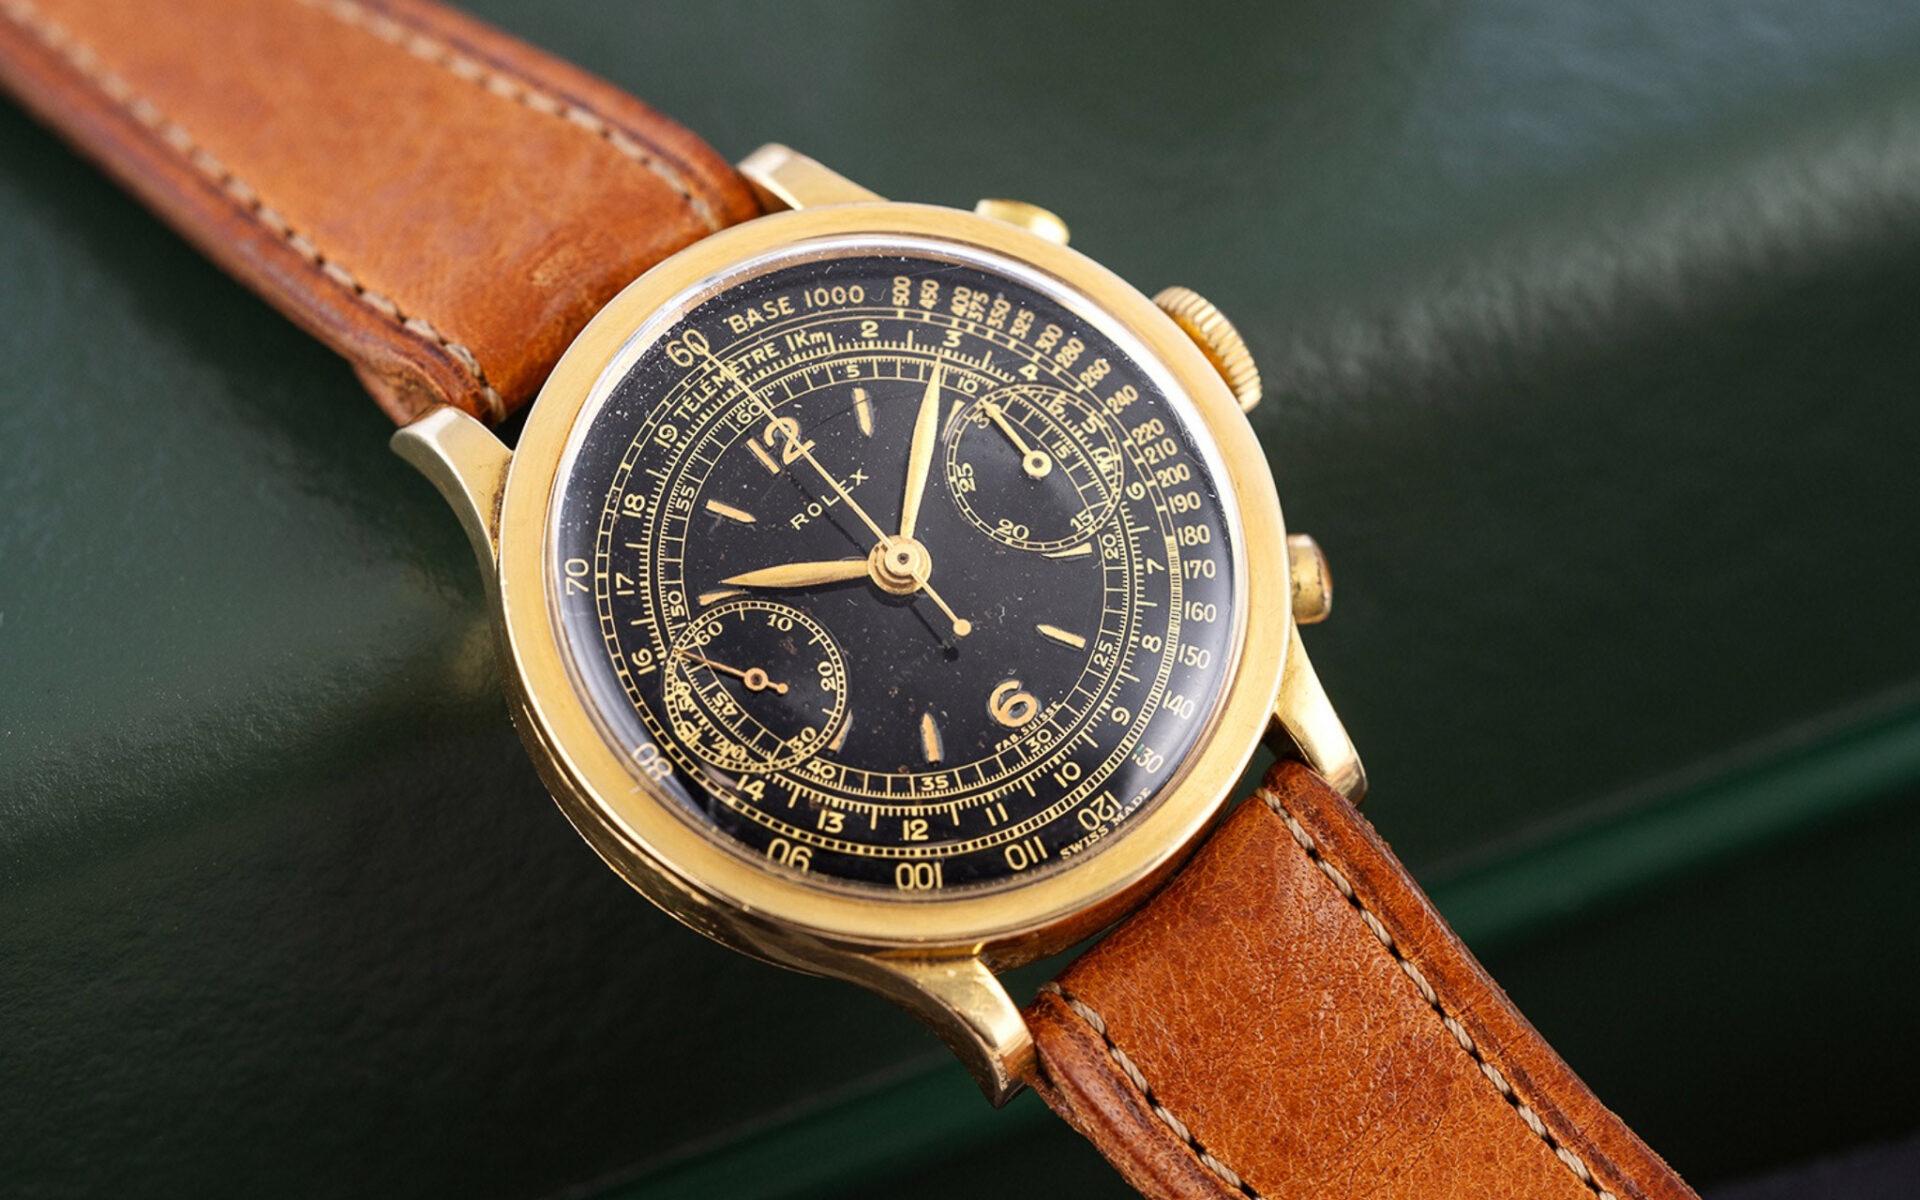 Rolex Chronograph reference 2508 - Source : Phillips 